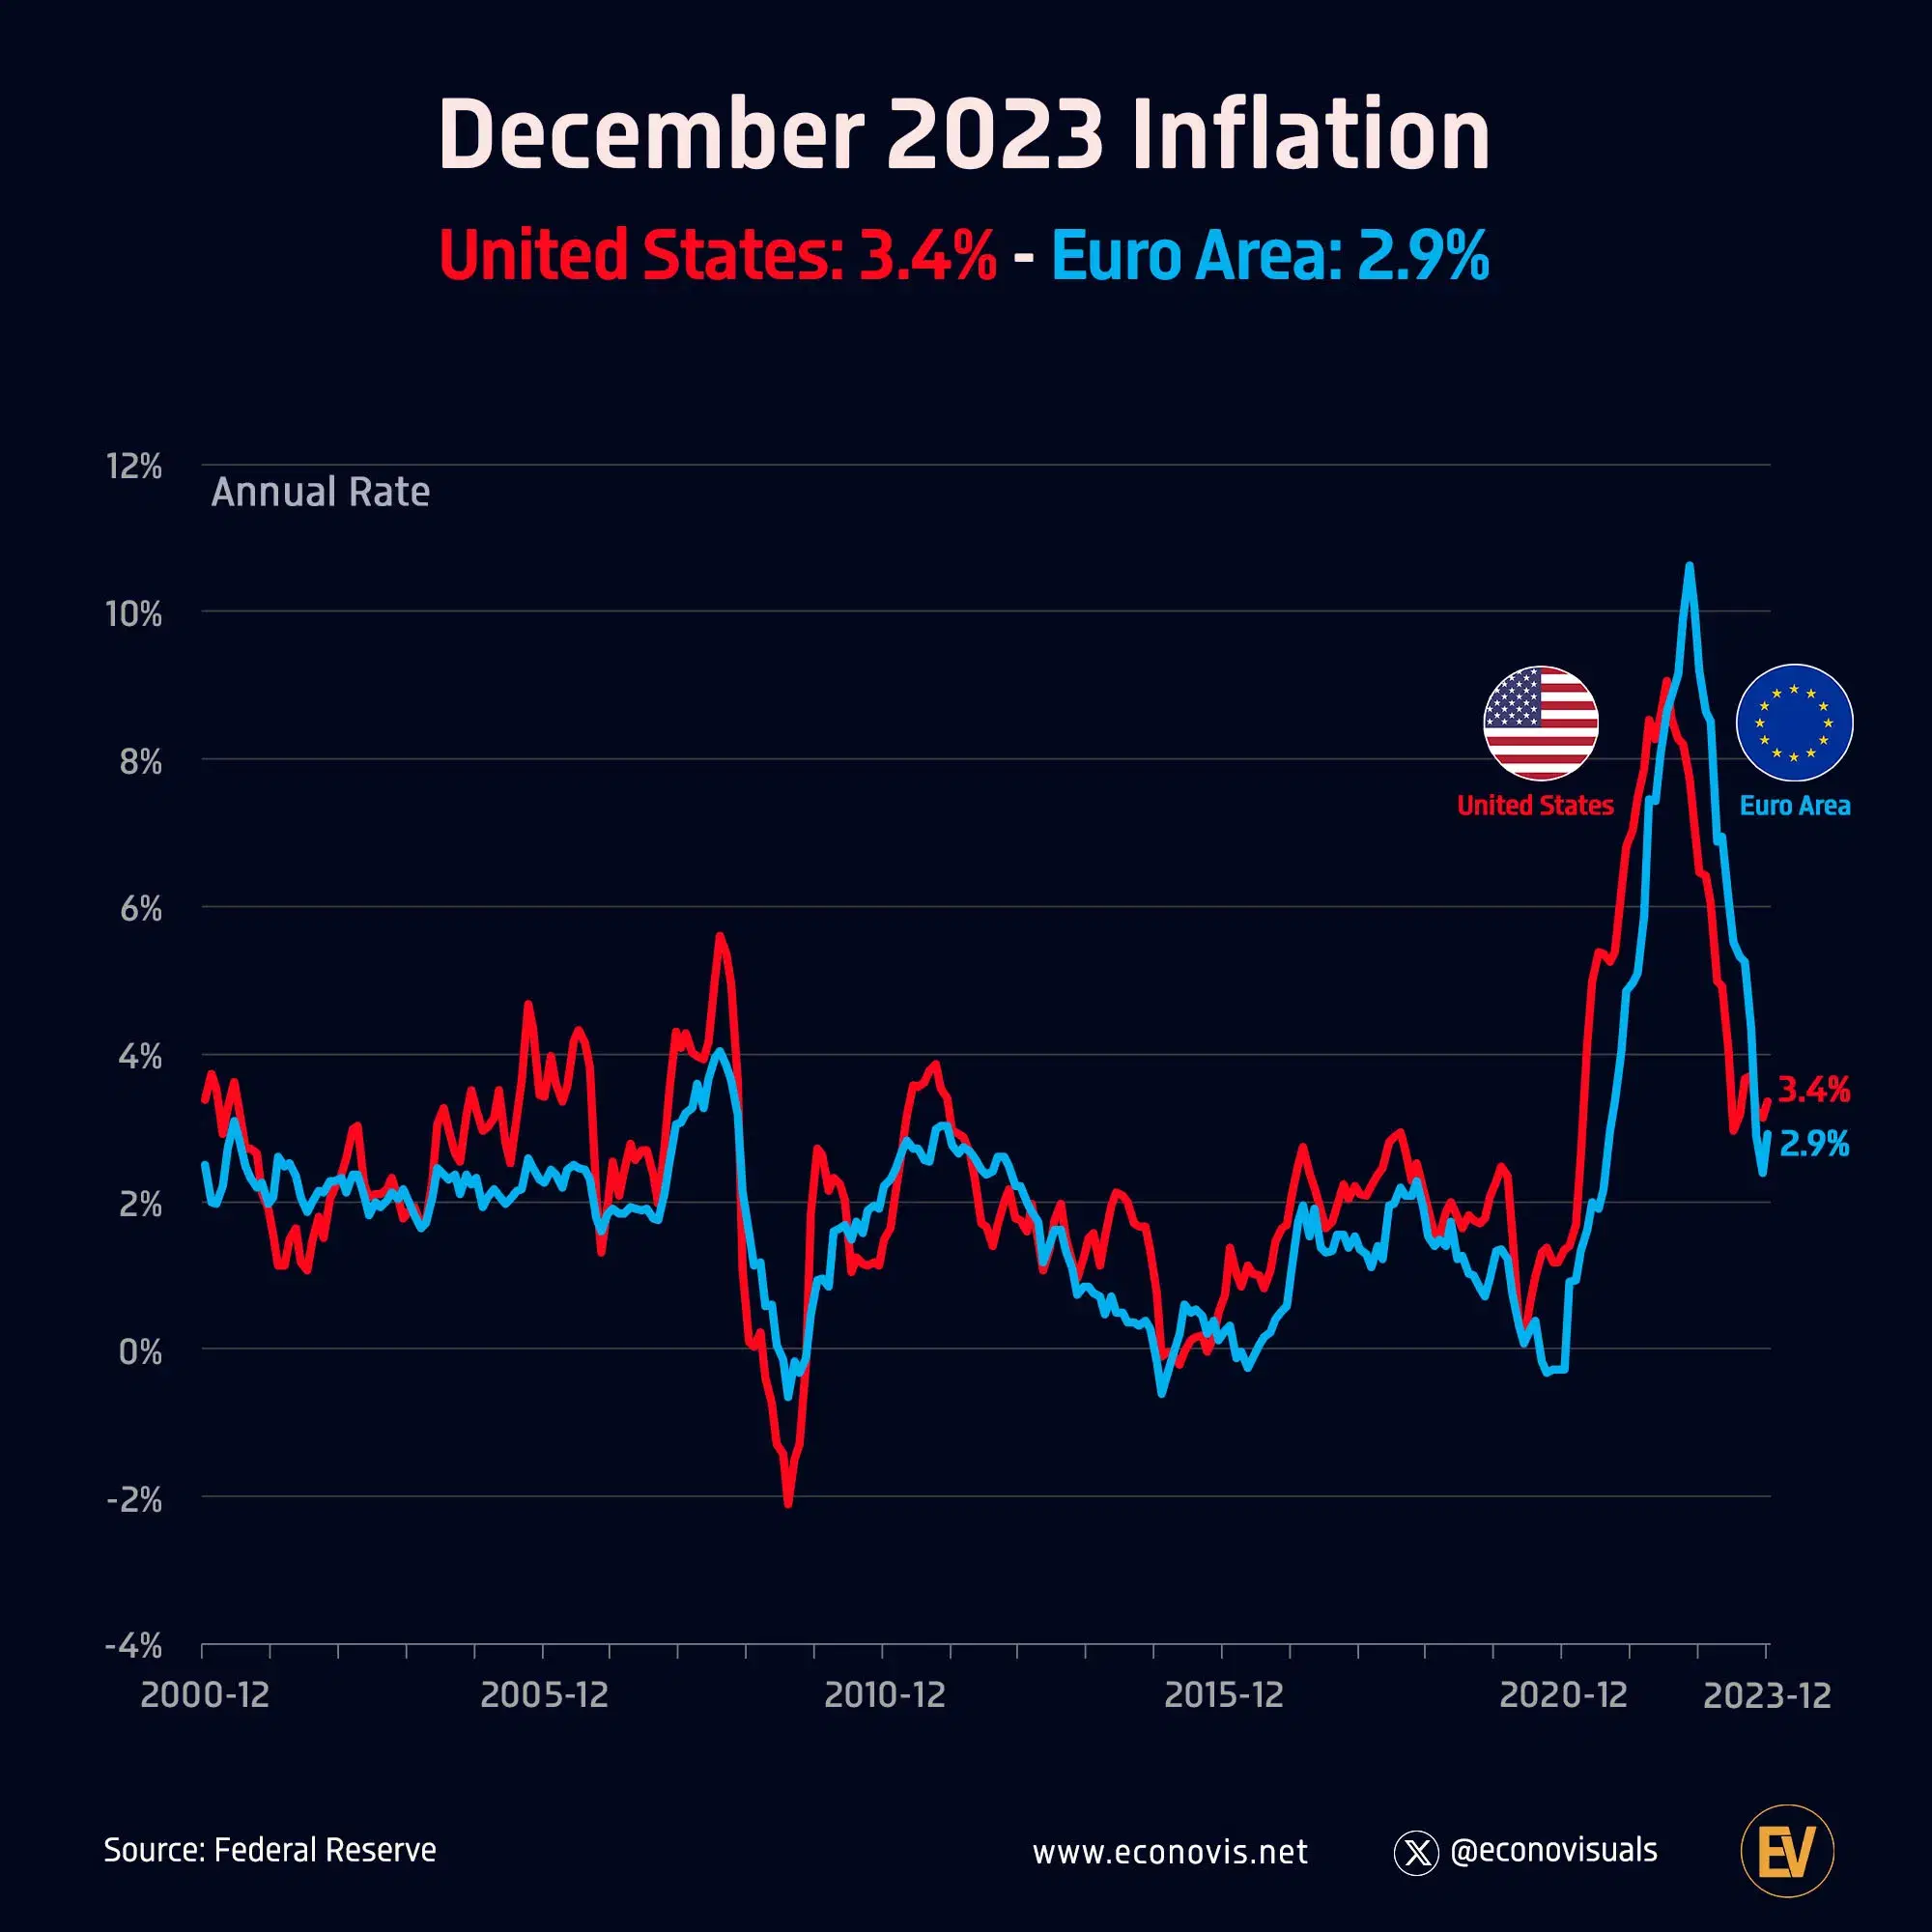 📈 Inflation Reached 3.4% in the United States and 2.9% in Euro Area in December 2023